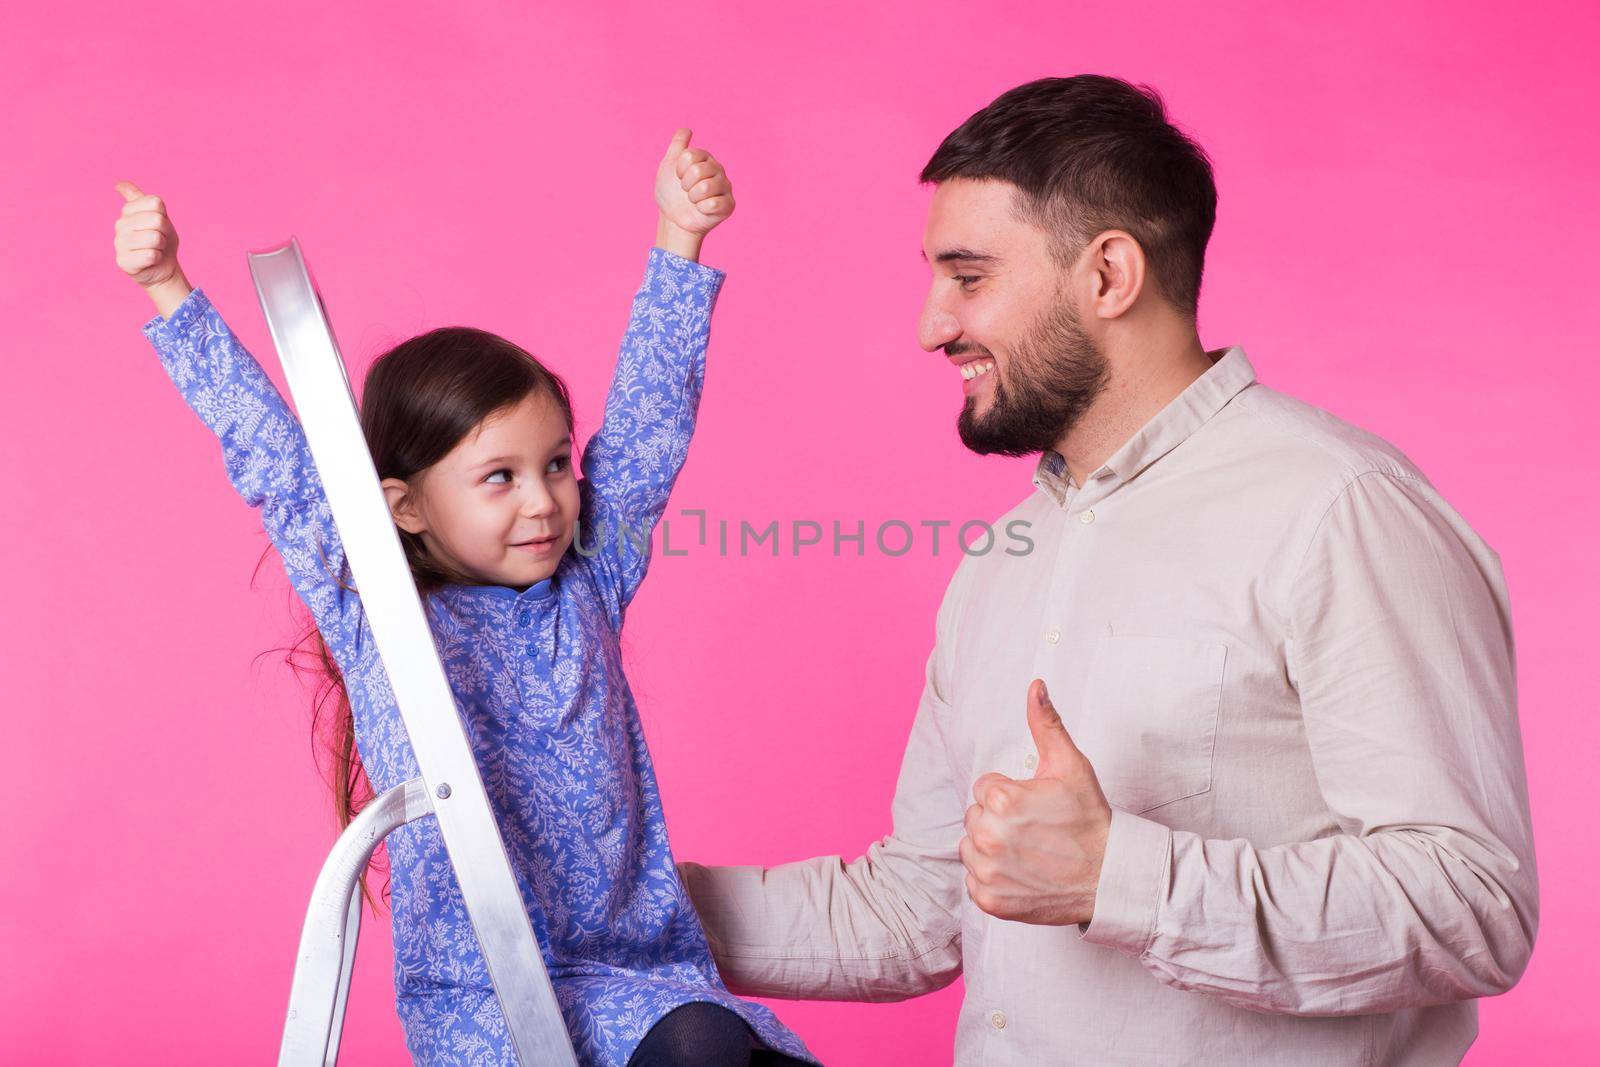 Father and her little daughter with thumbs up over pink background. Adult man and baby girl are happy.